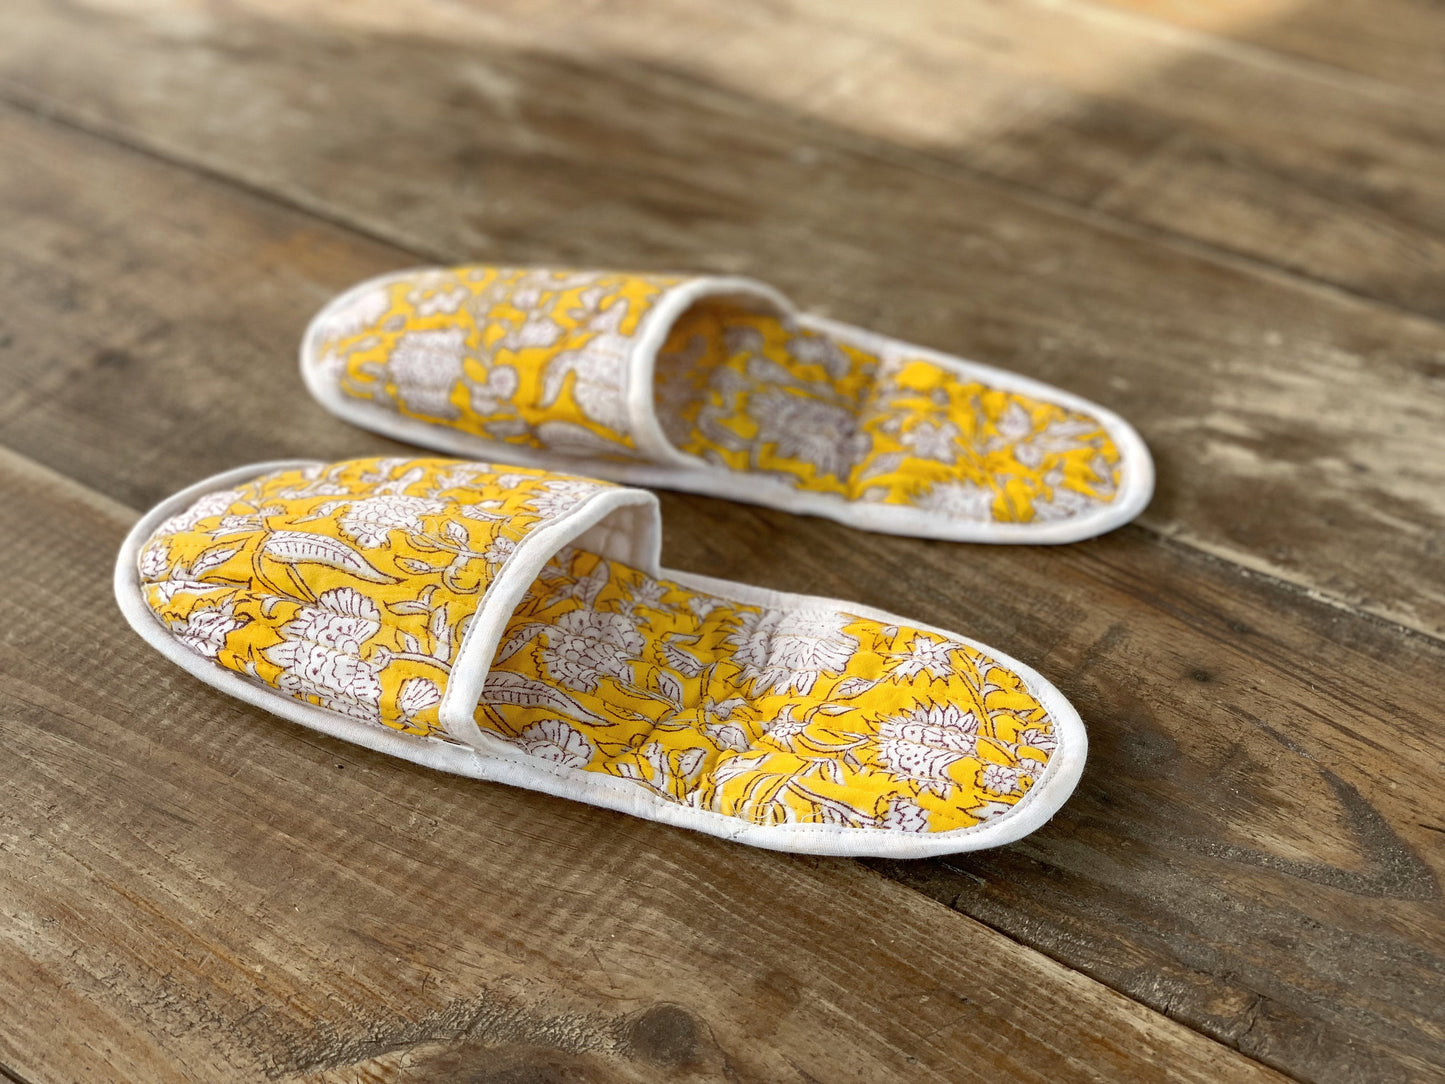 Padded travel slippers with matching bag · Pure cotton block print in India · Bath shower slippers · White yellow